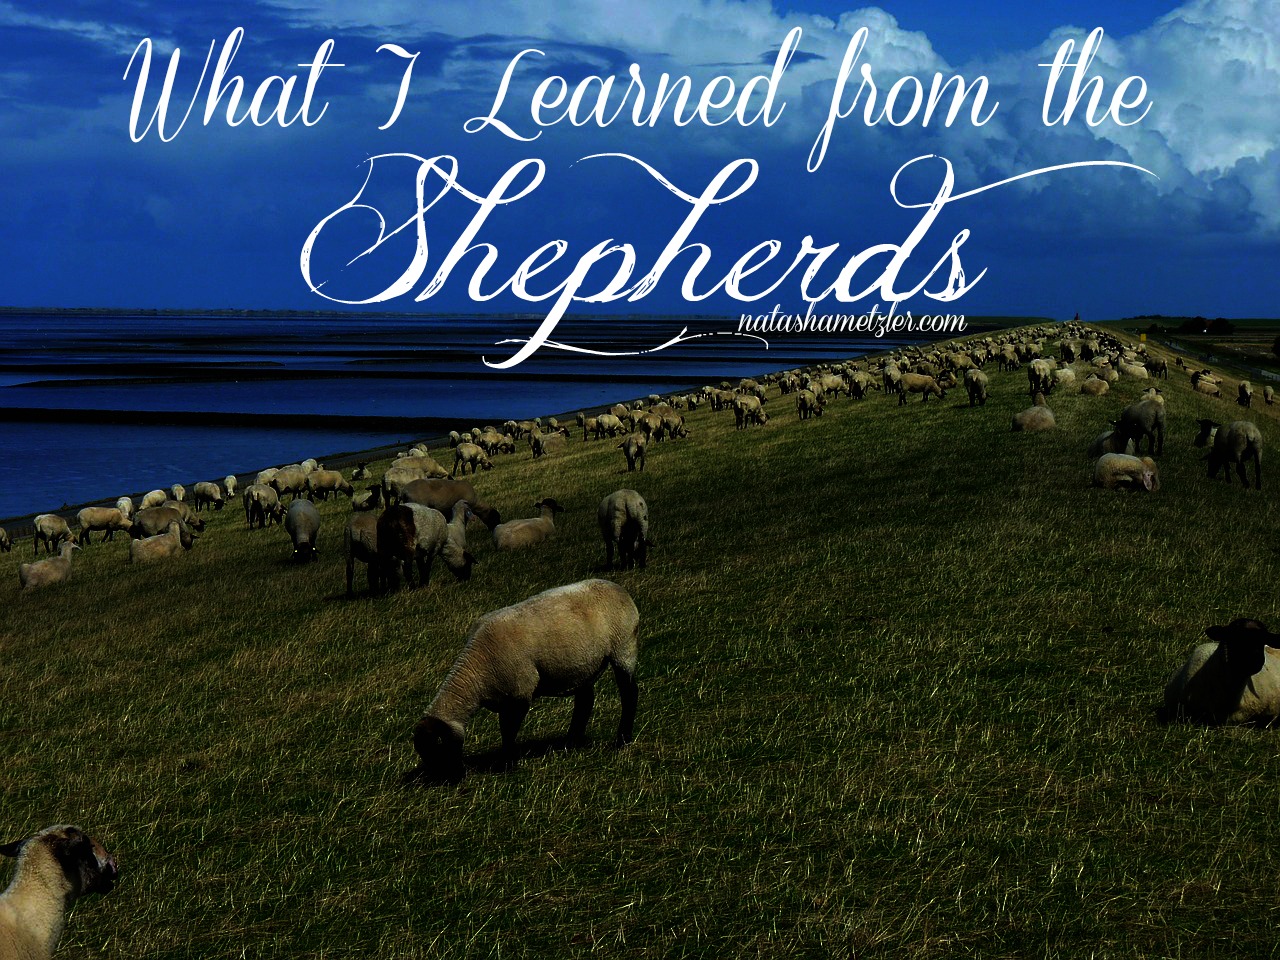 what I learned from the Shepherds